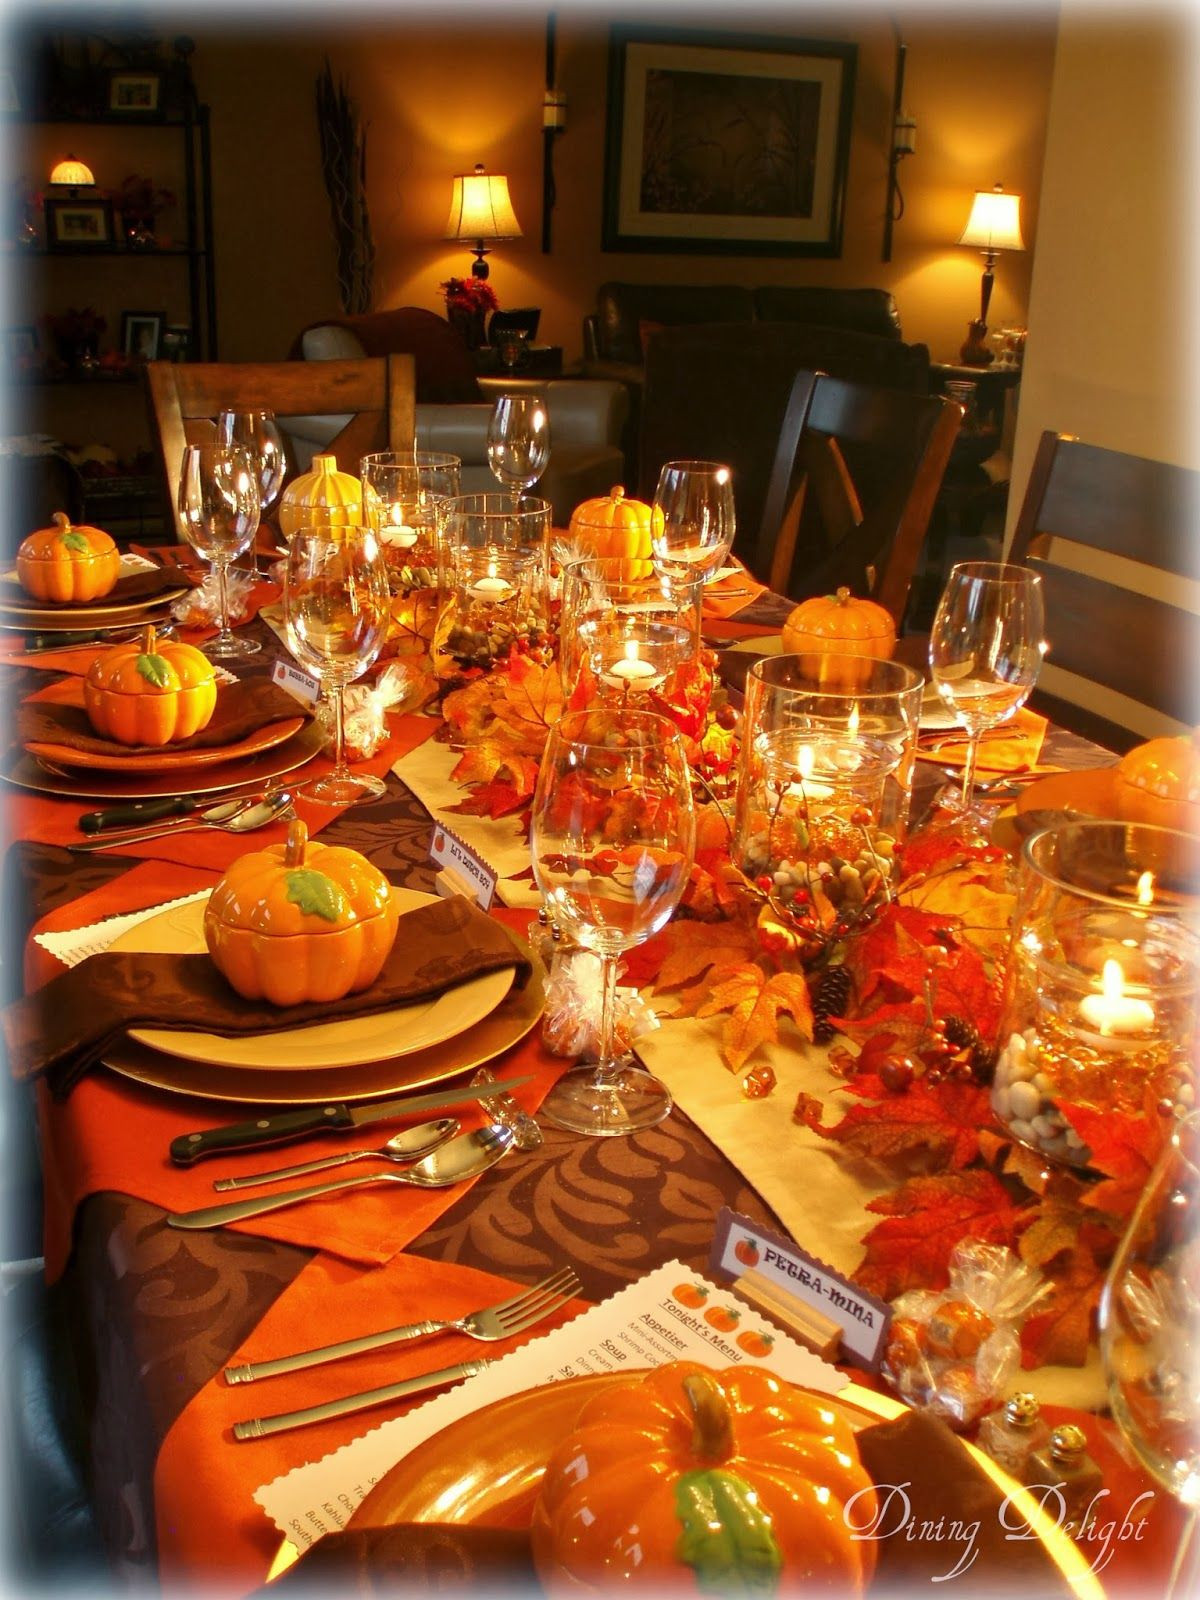 Thanksgiving Table Decorations Pinterest
 This past weekend we invited 4 other couples and hosted a